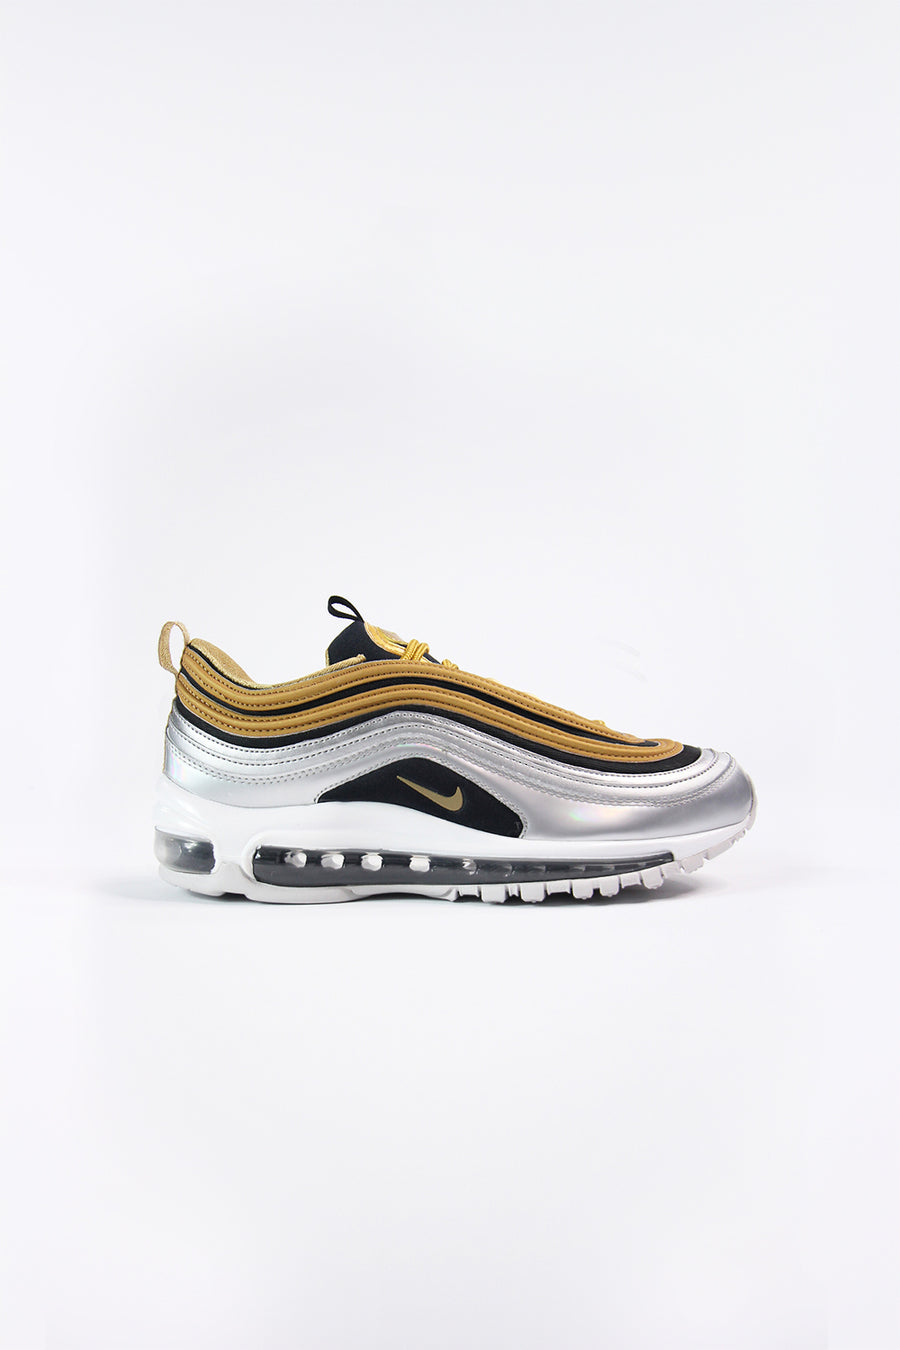 nike 97 special